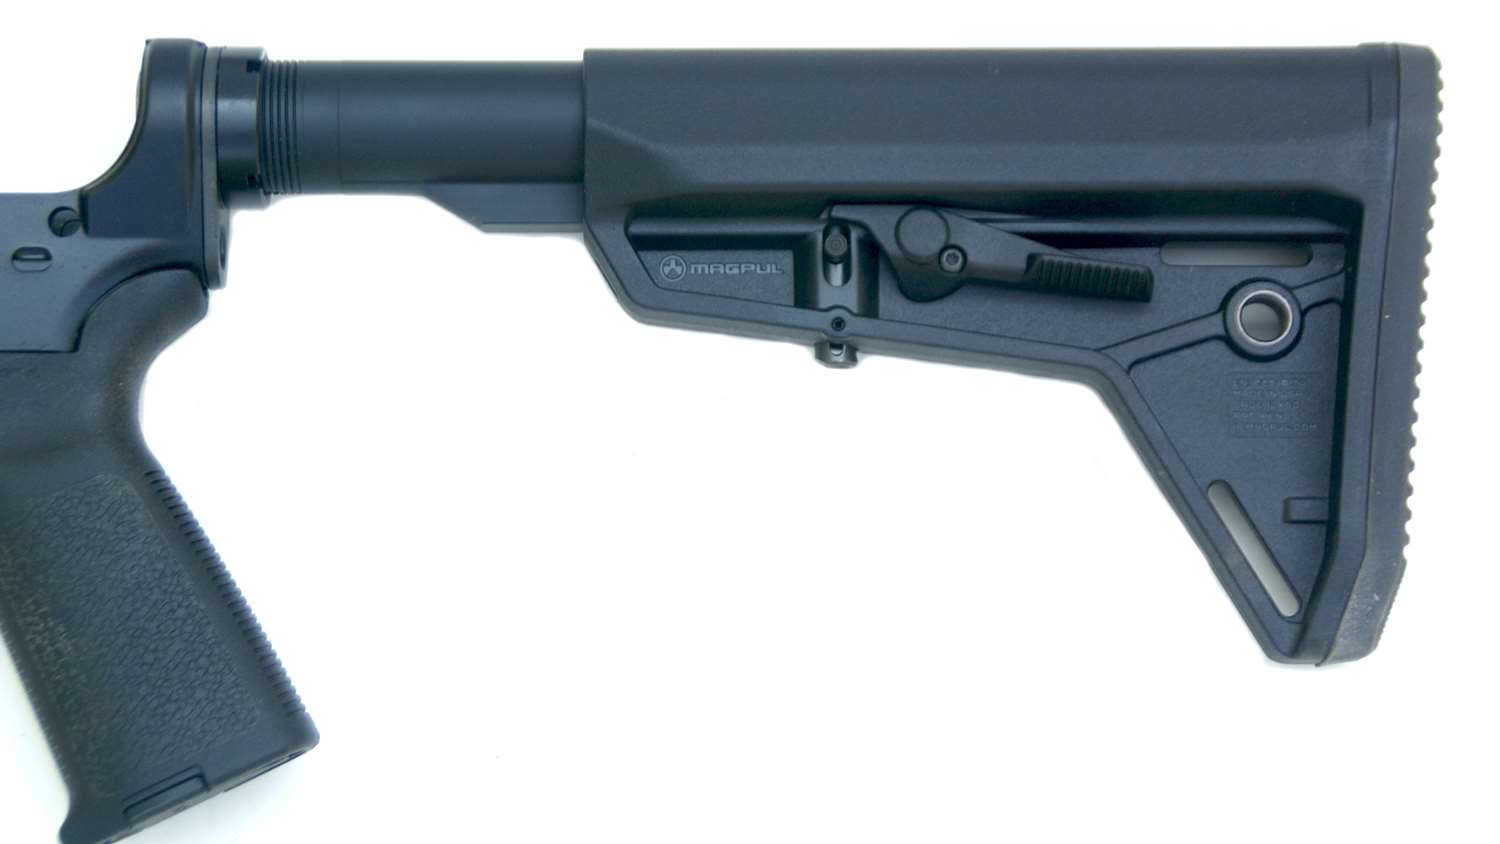 Magpul MOE SL buttstock on Ruger AR-Lower